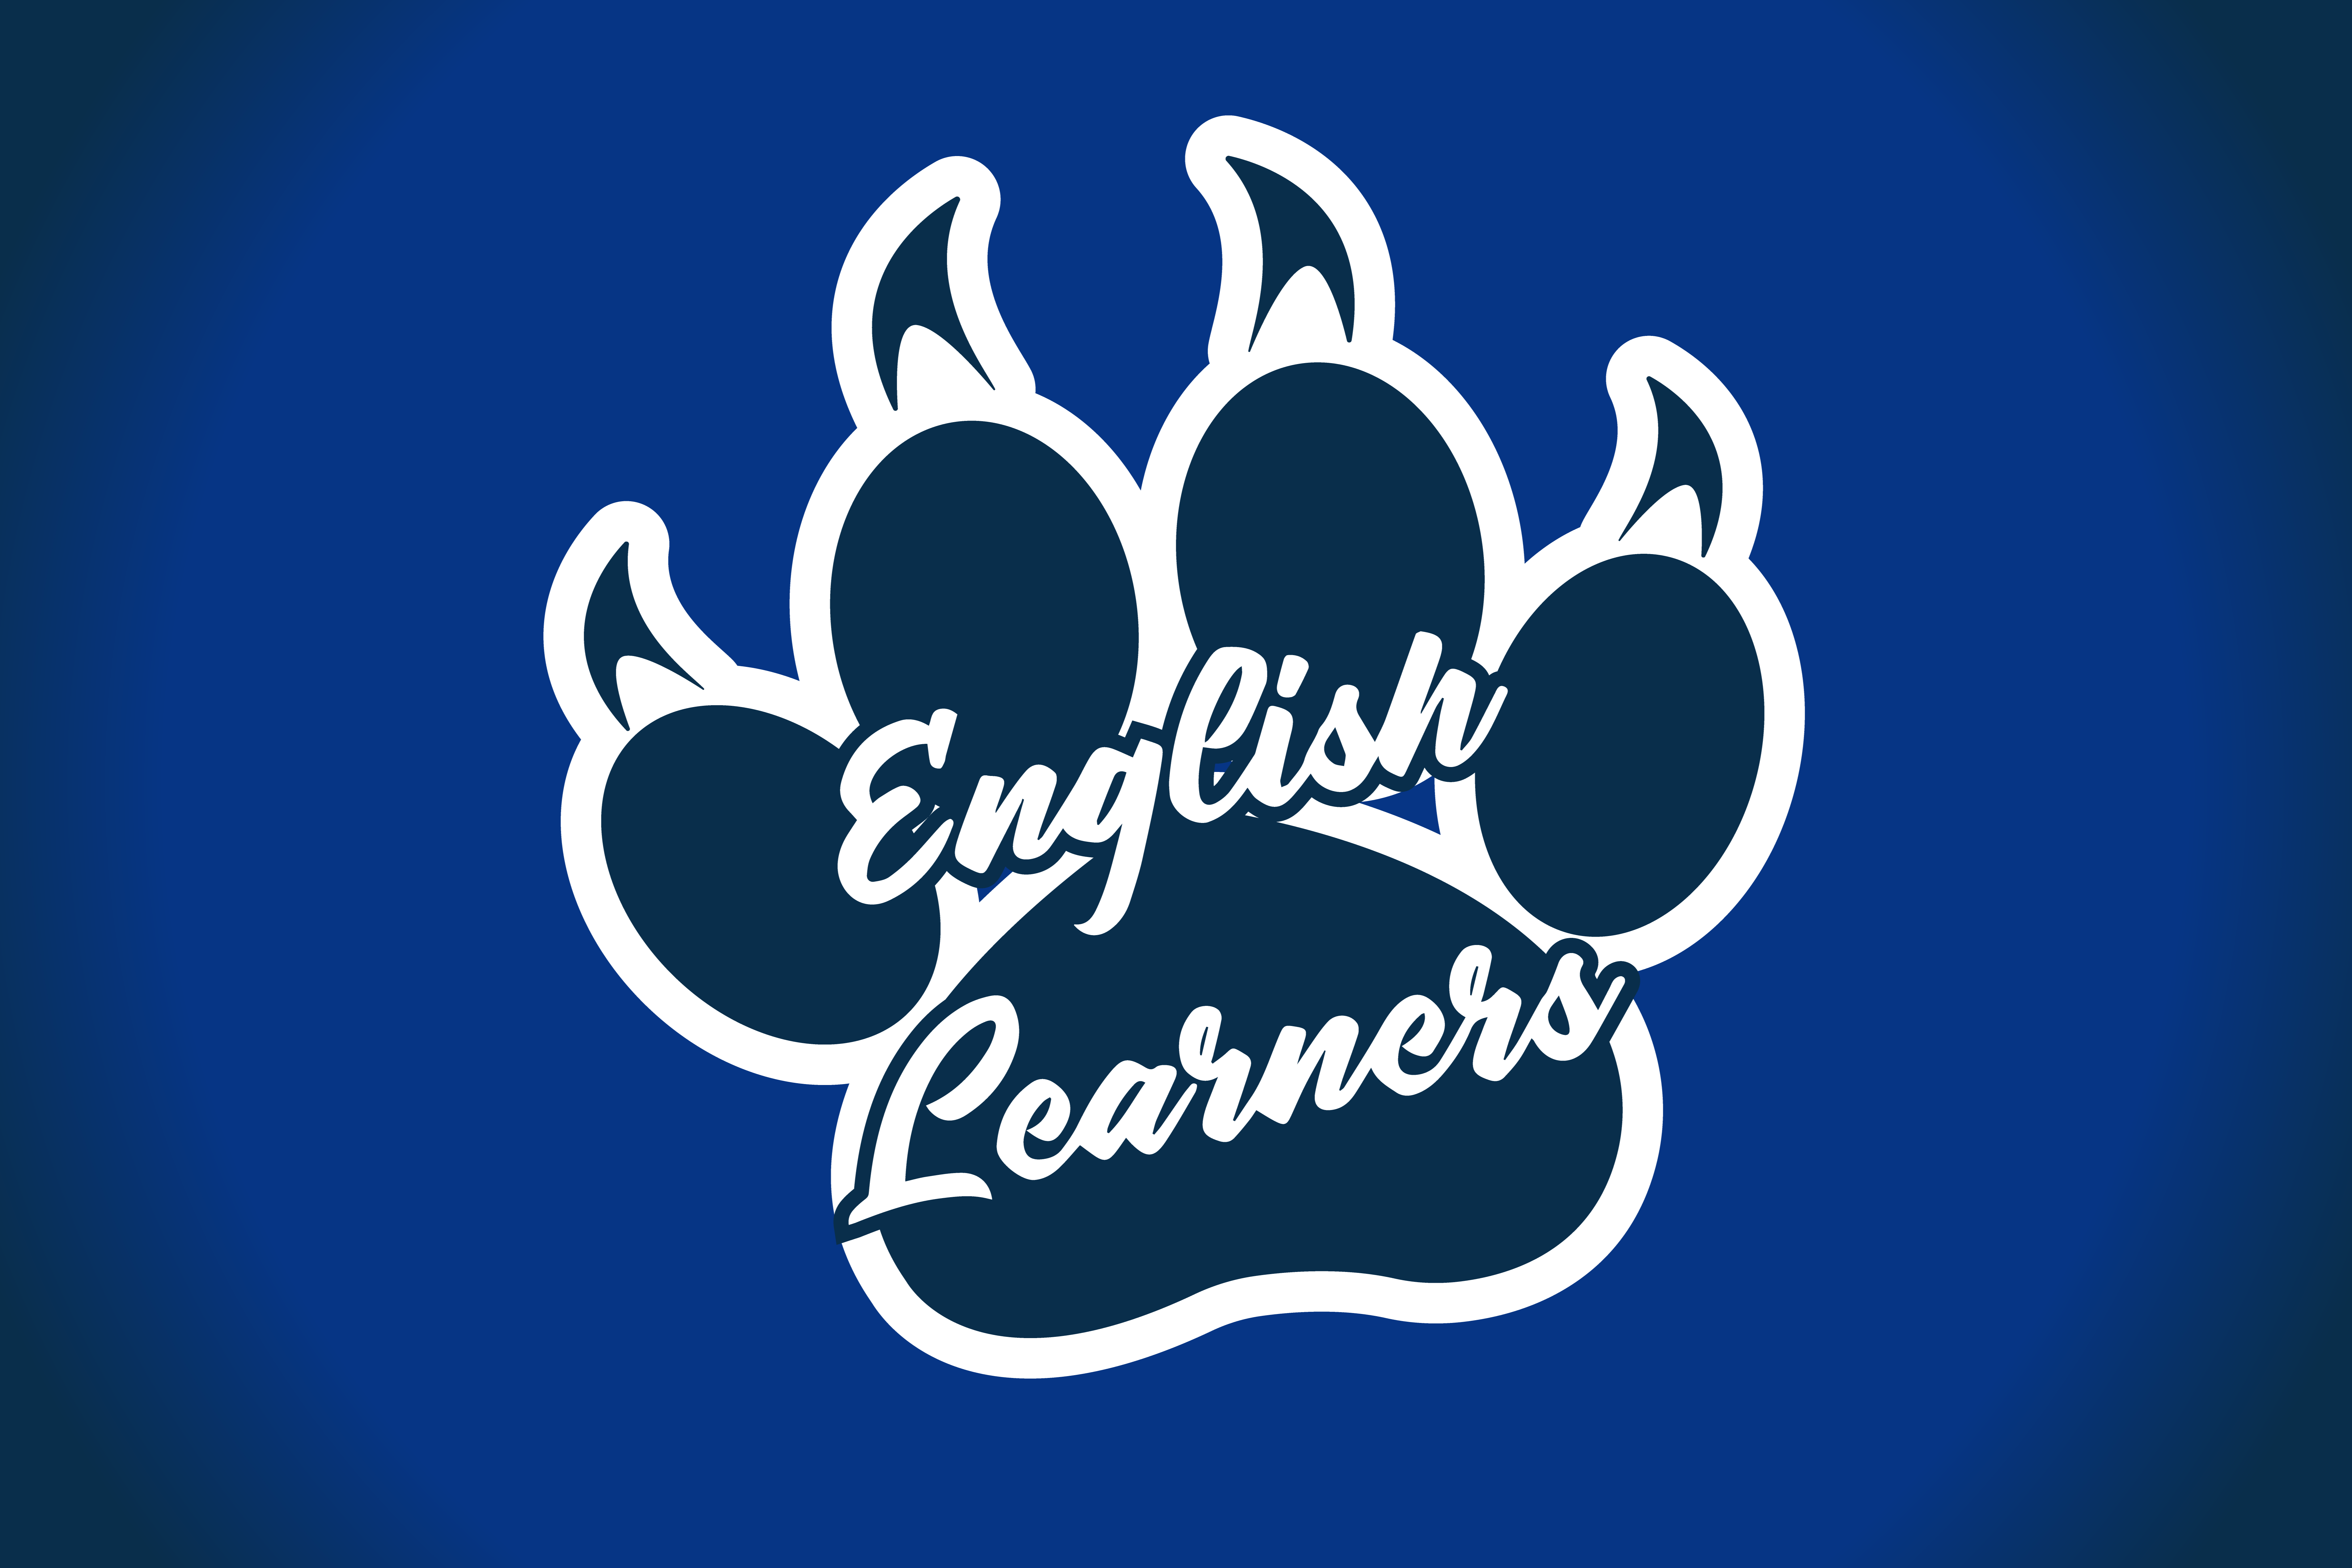 English Learners image of paw